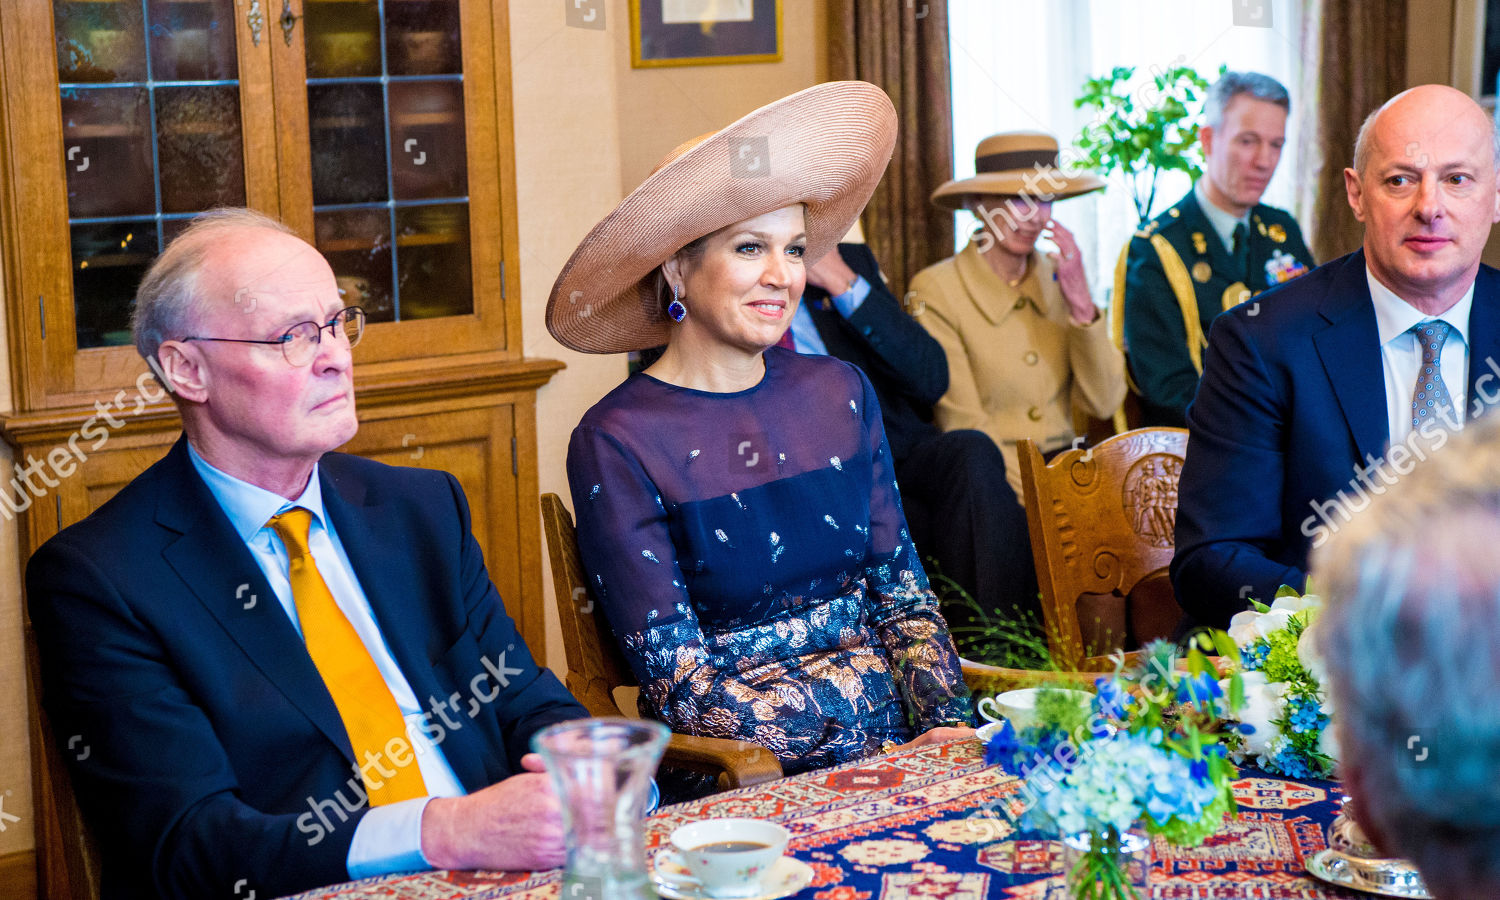 queen-maxima-visit-to-the-bavaria-brewery-lieshout-netherlands-shutterstock-editorial-10180868ad.jpg